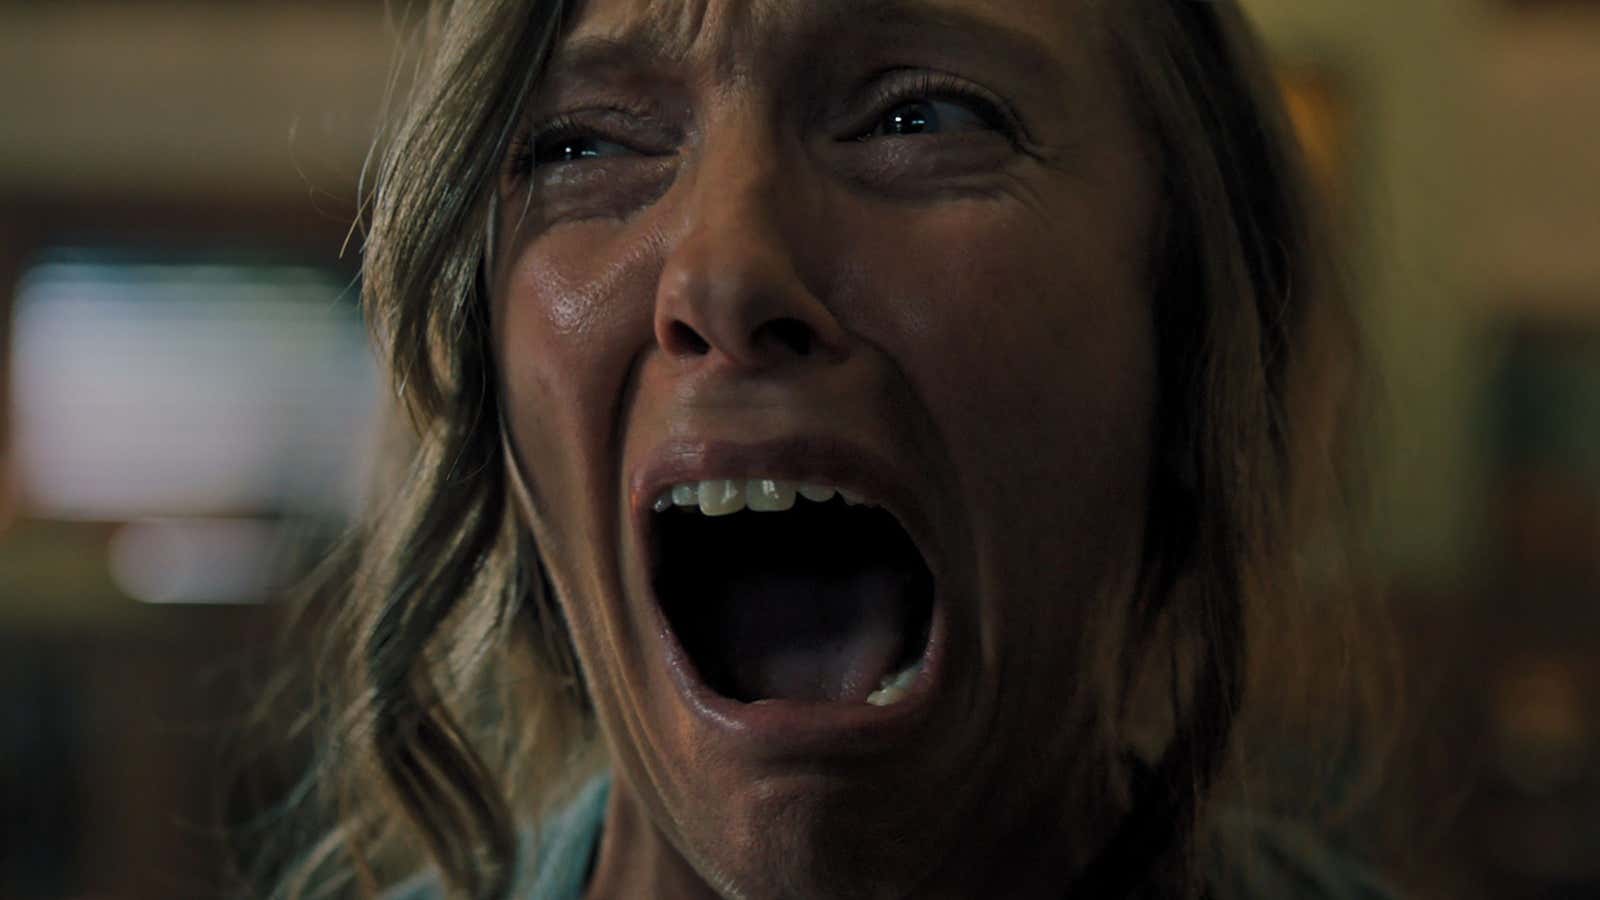 The only thing “elevated” about the film is Toni Collette’s sublime performance.